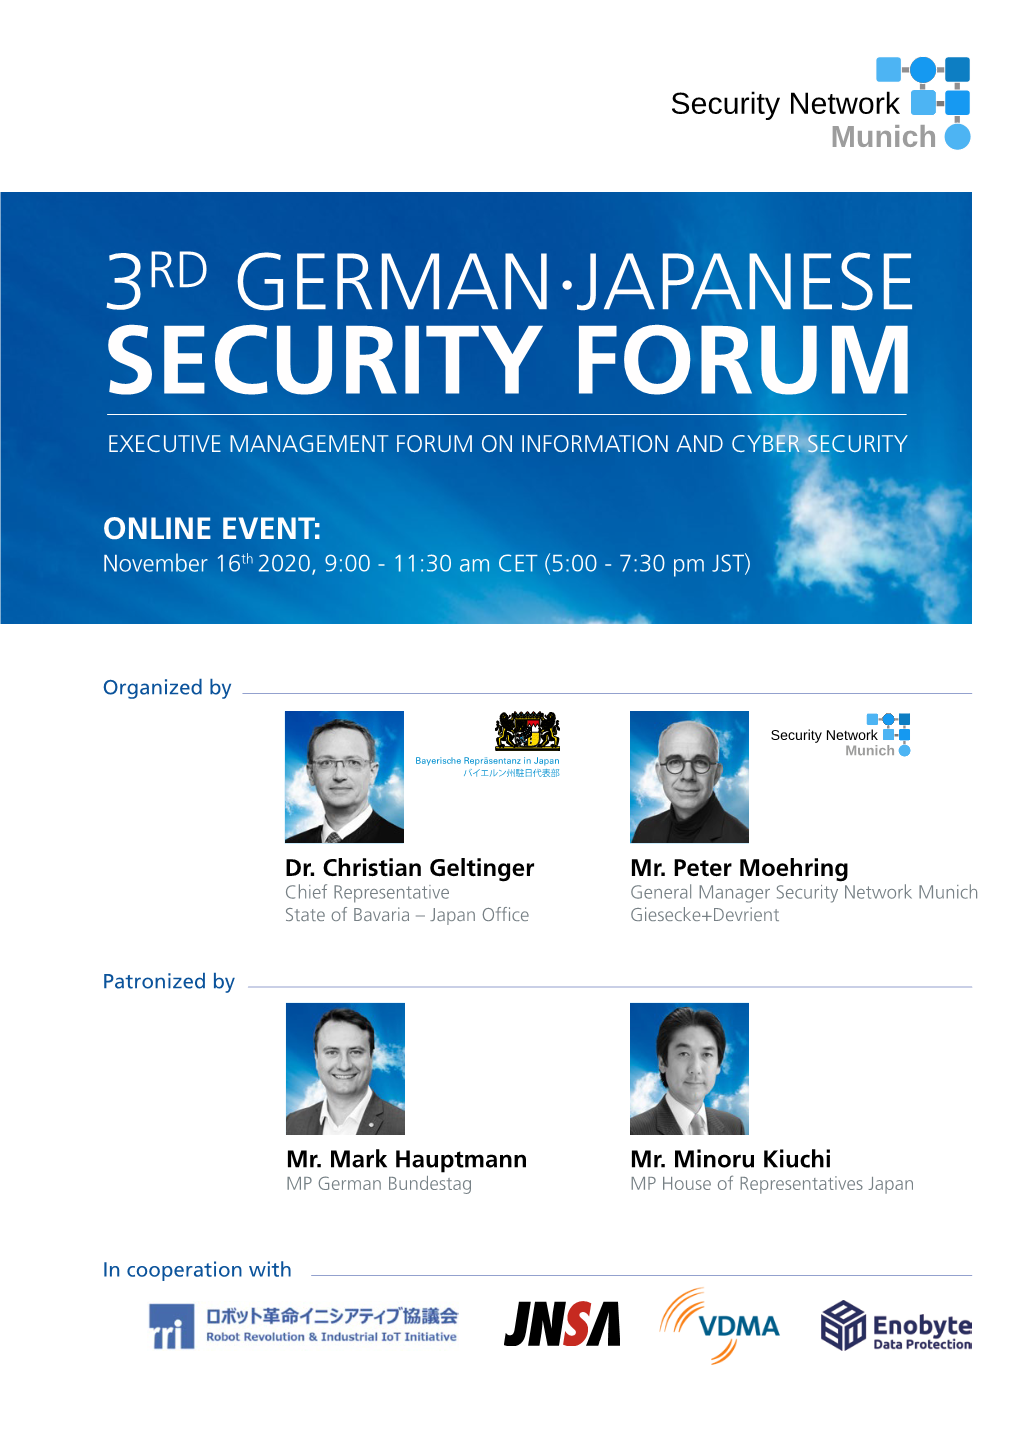 Security Forum Executive Management Forum on Information and Cyber Security